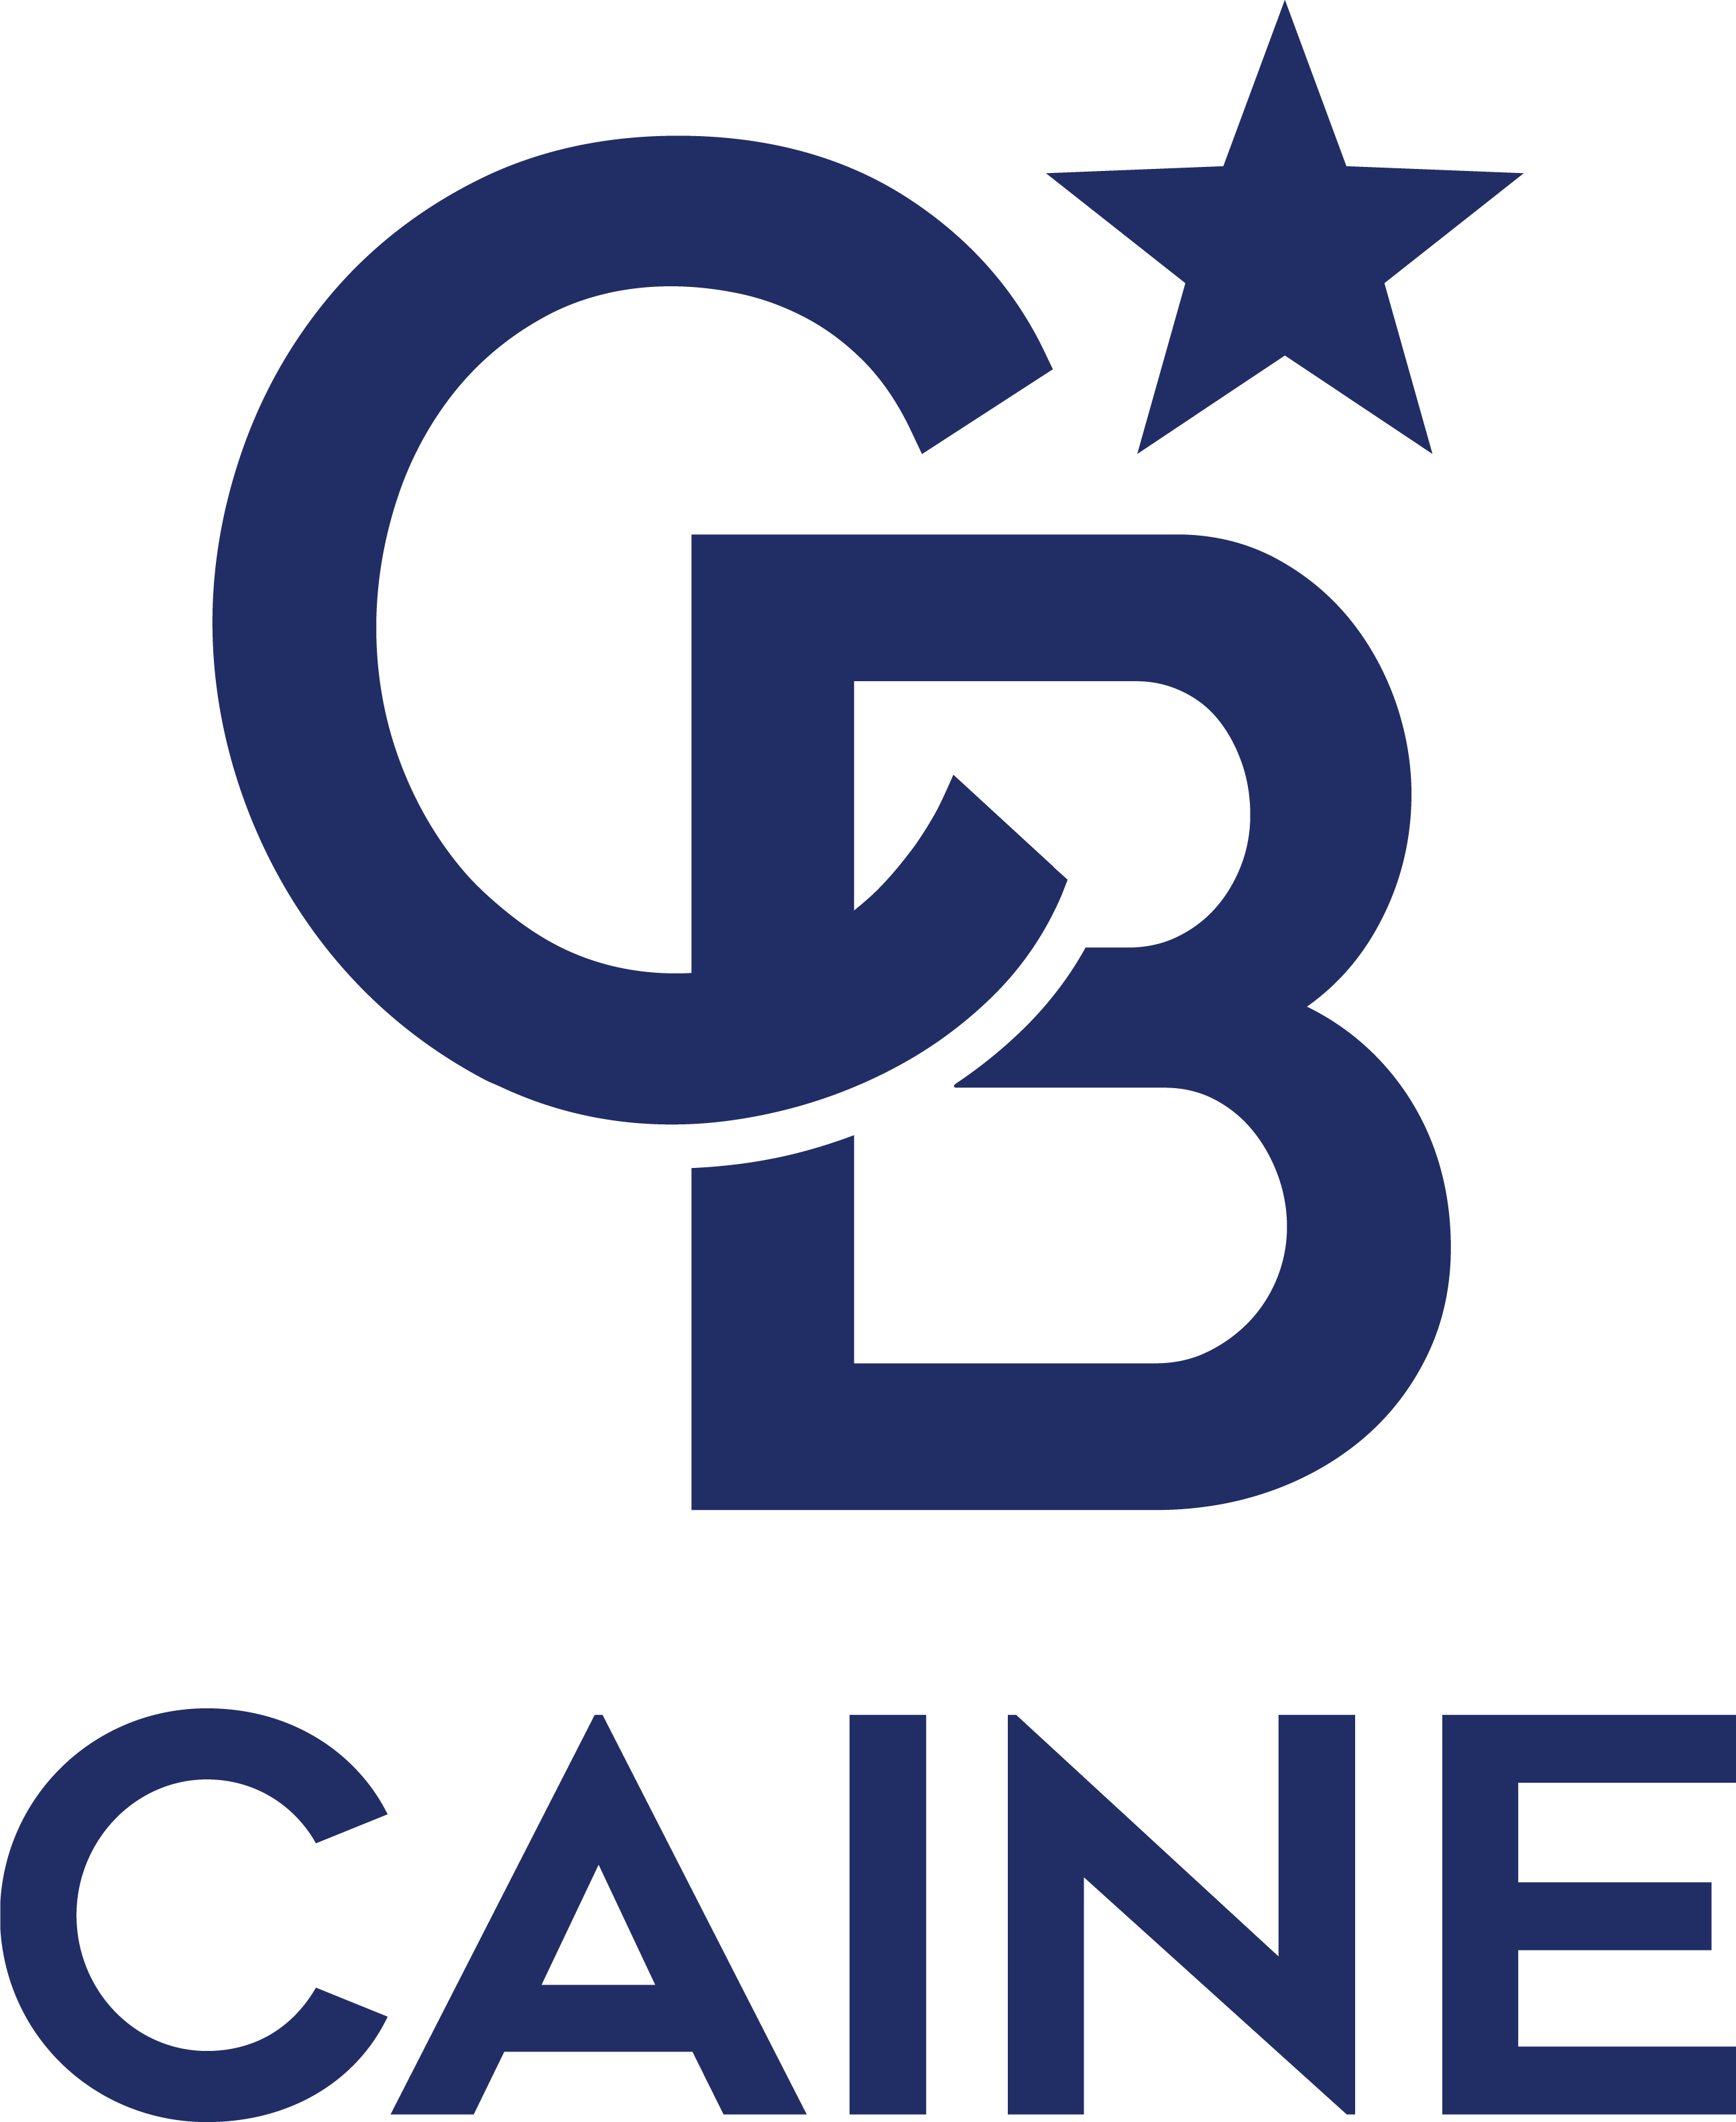 Coldwell Banker Caine Company Logo